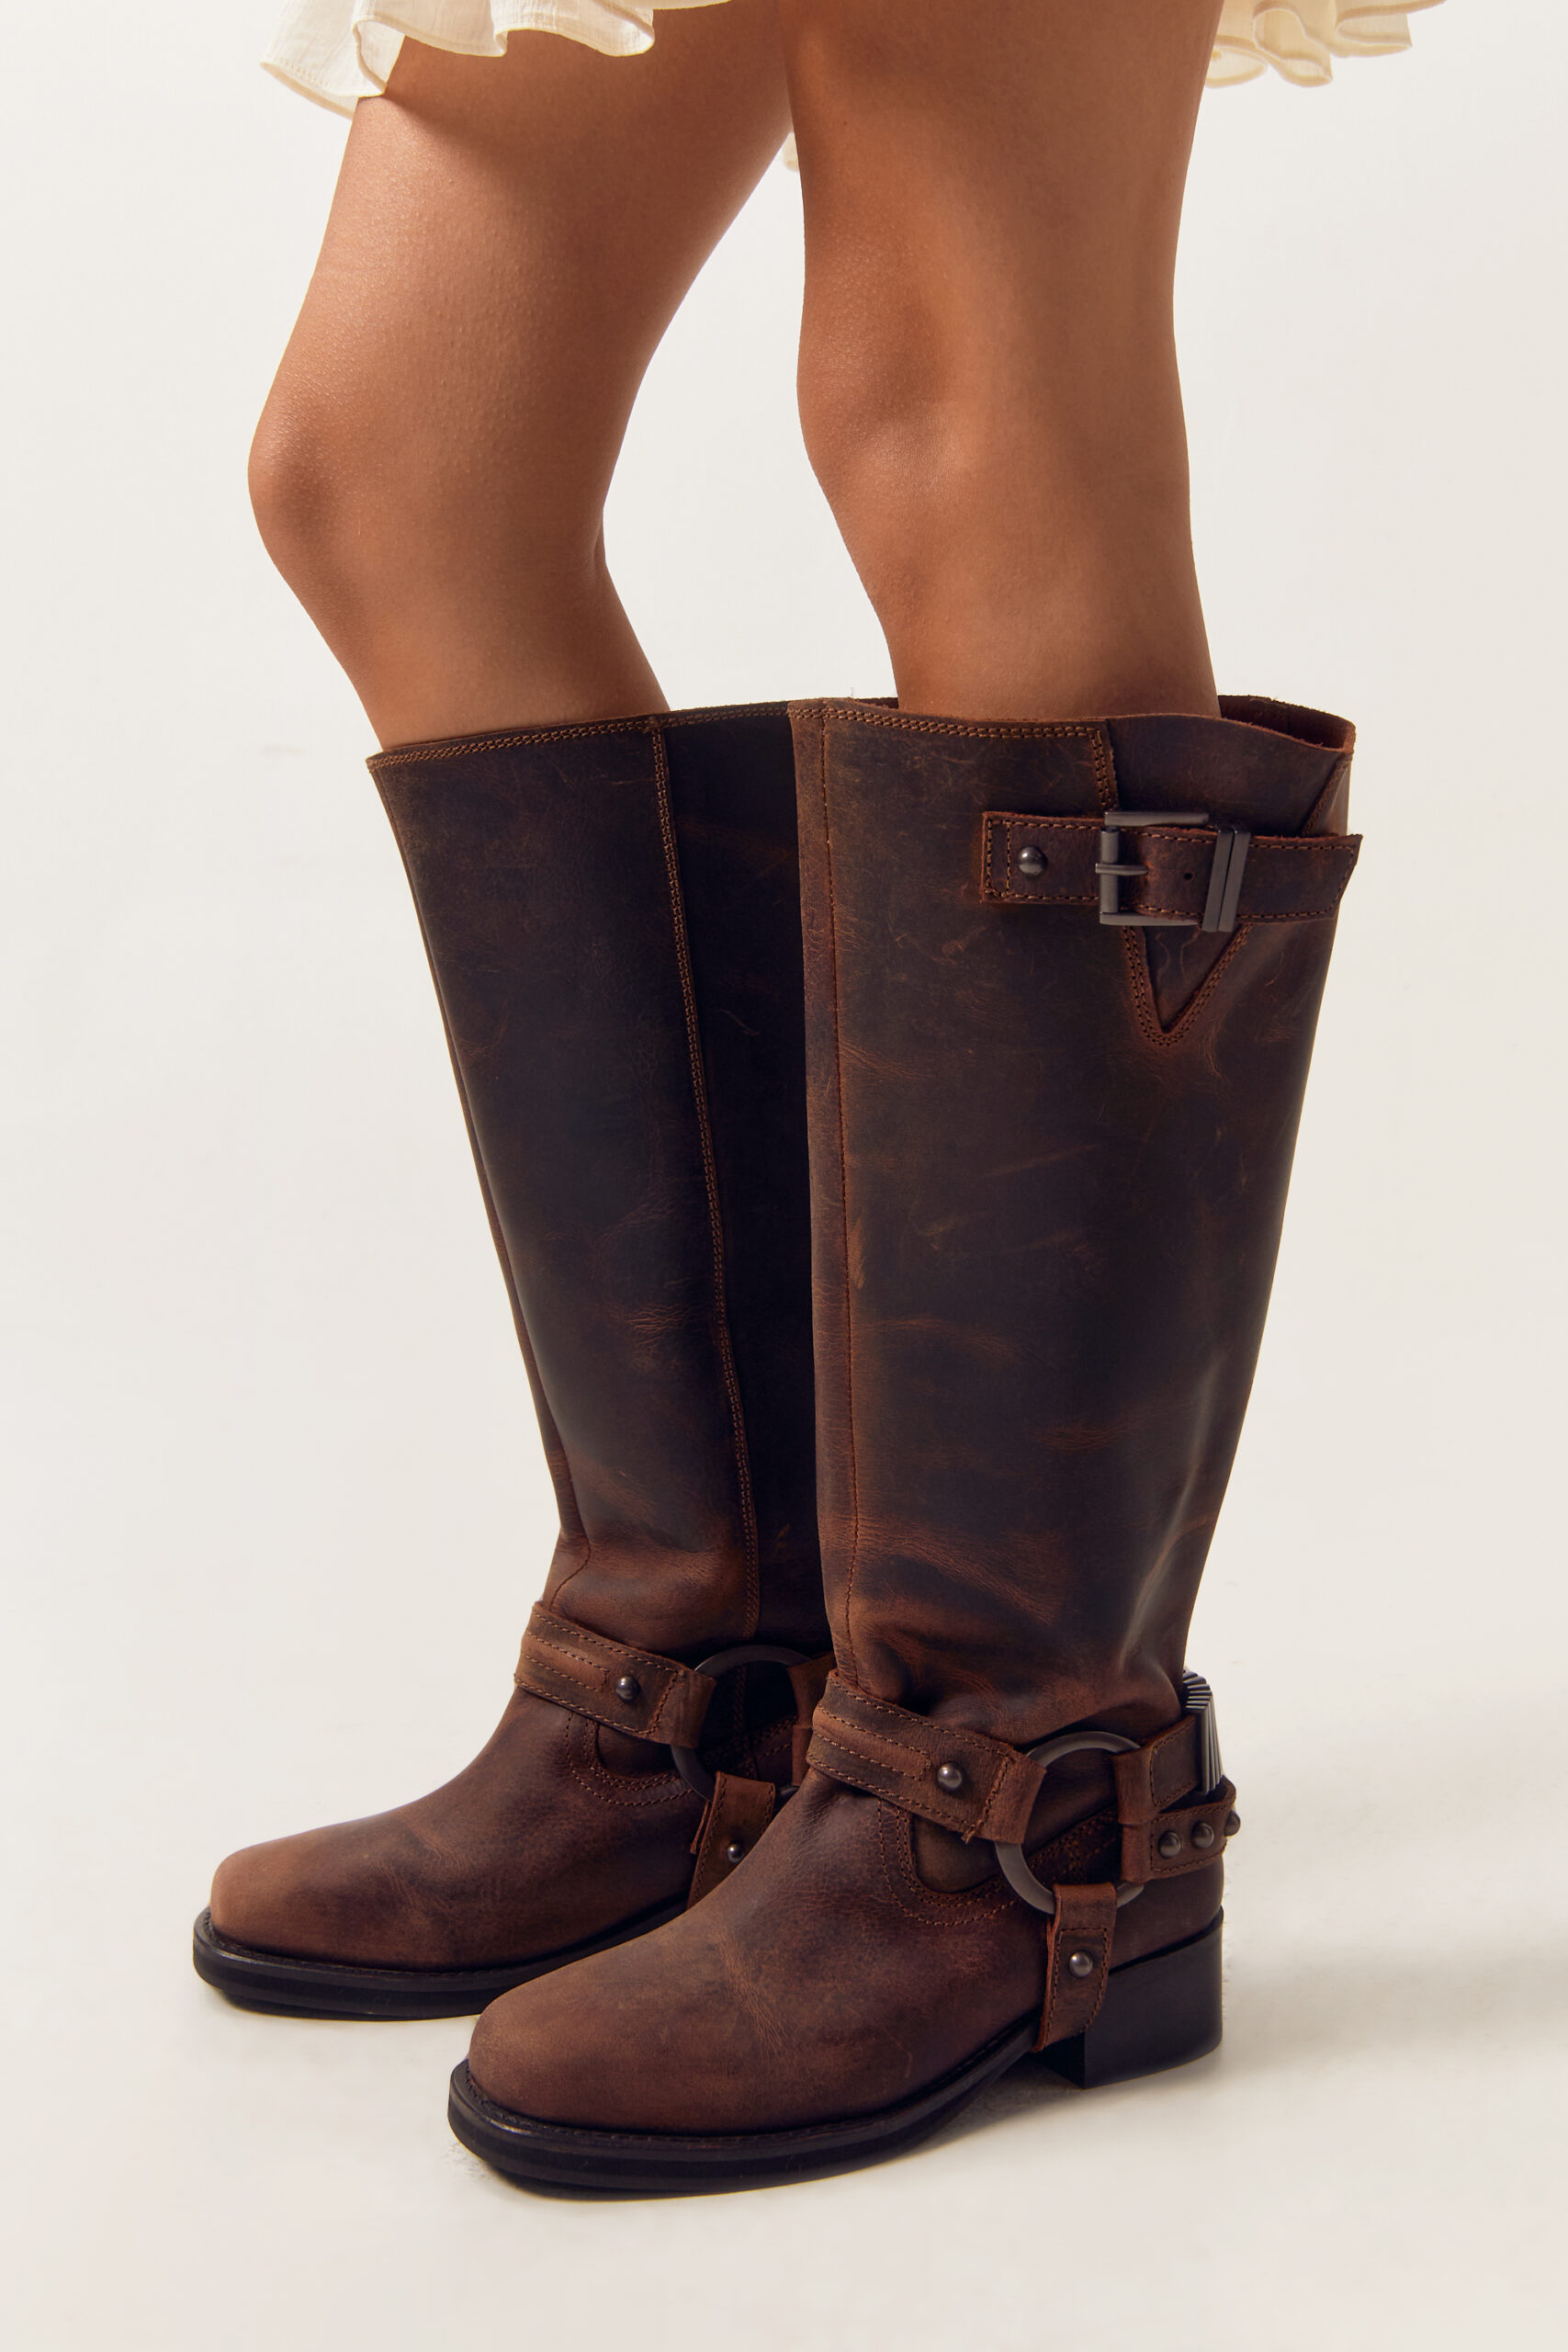 Tarnished Leather Buckle Harness Knee High Boots